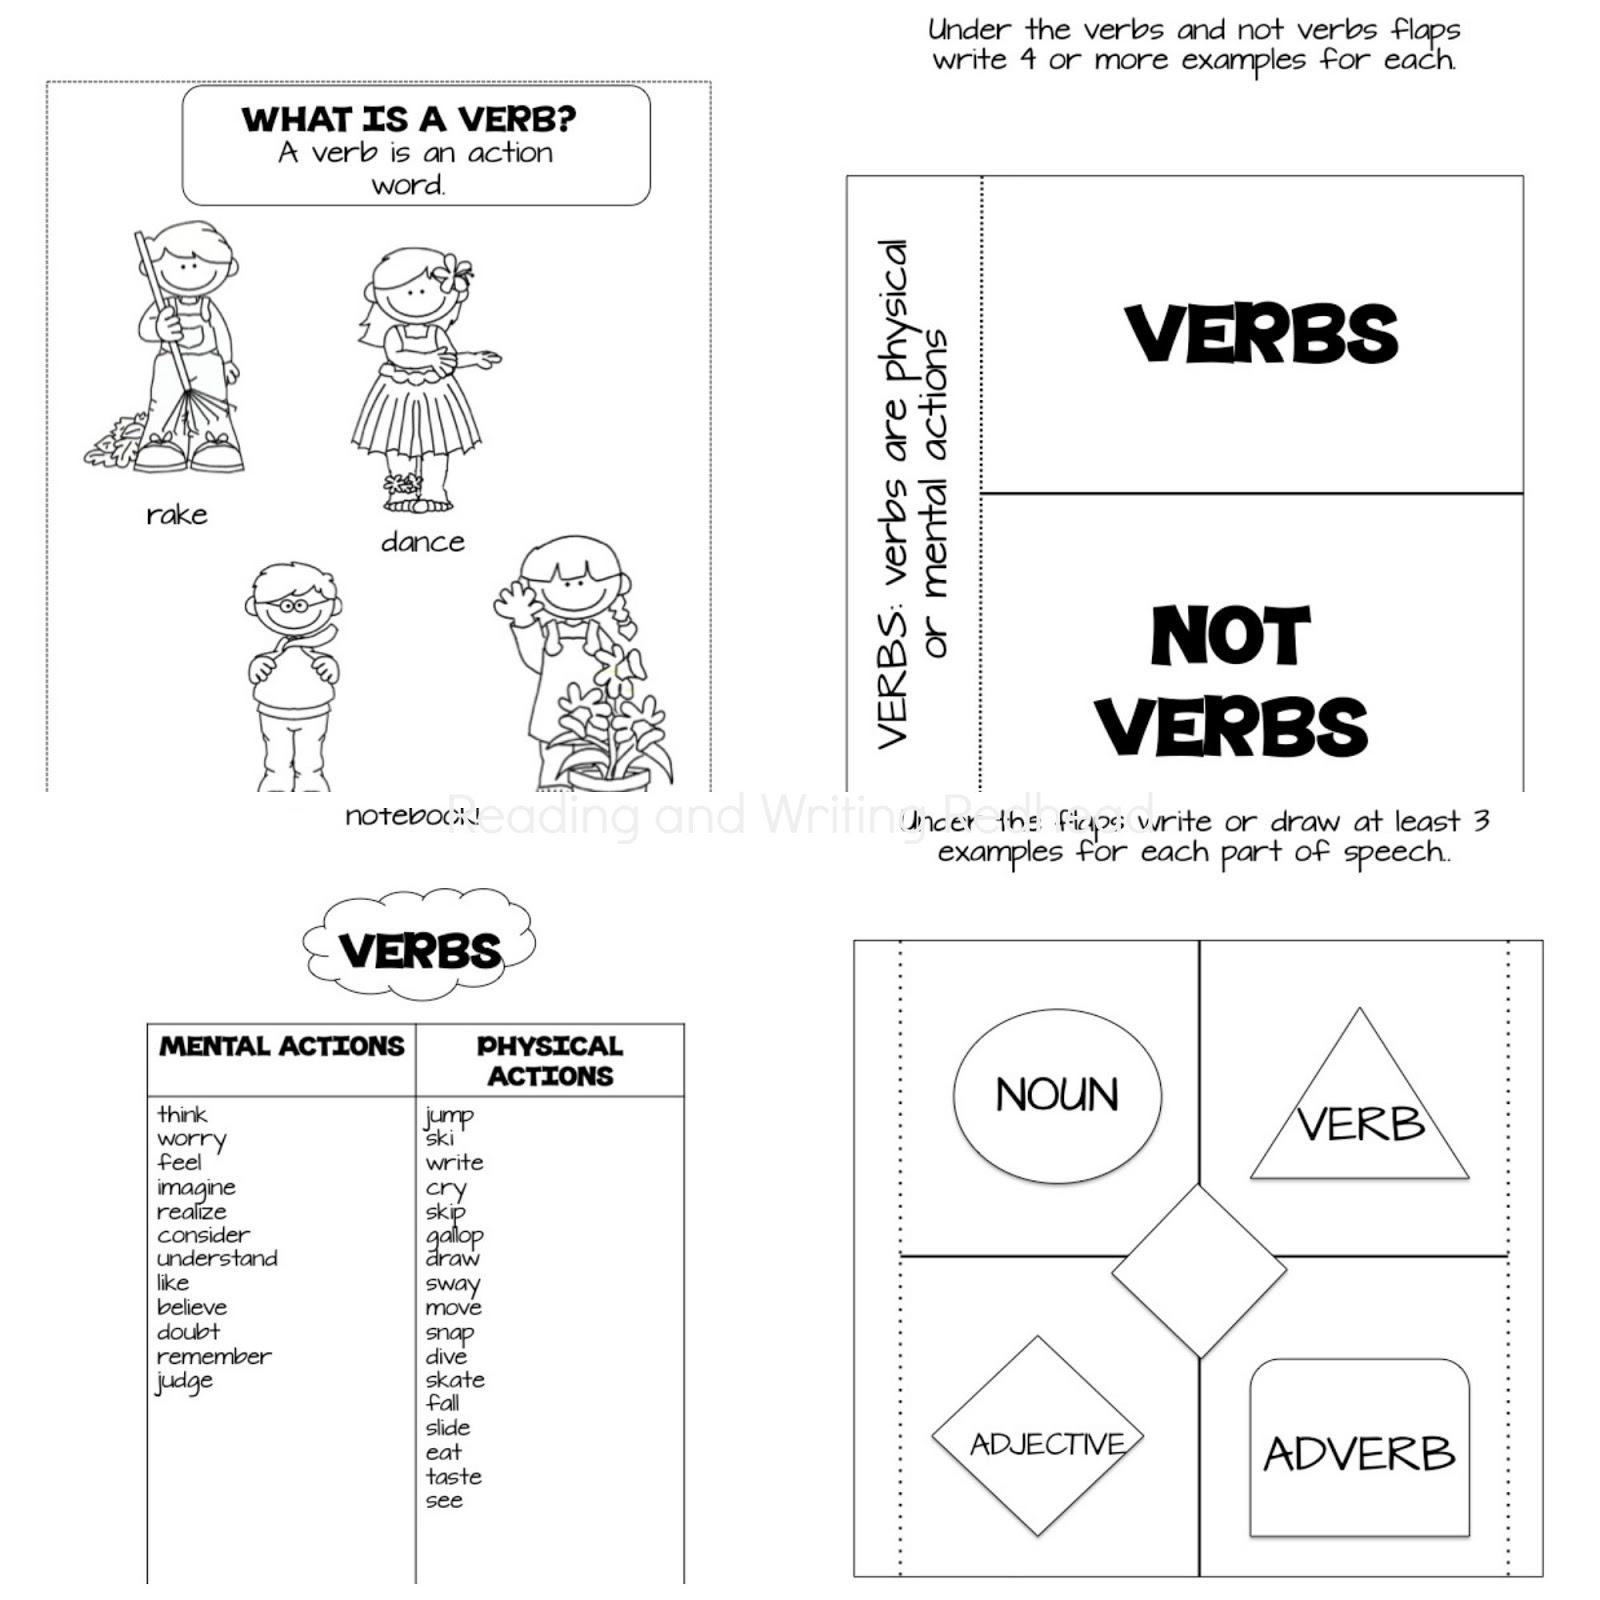 Get the Details on the Language Arts Interactive Notebook